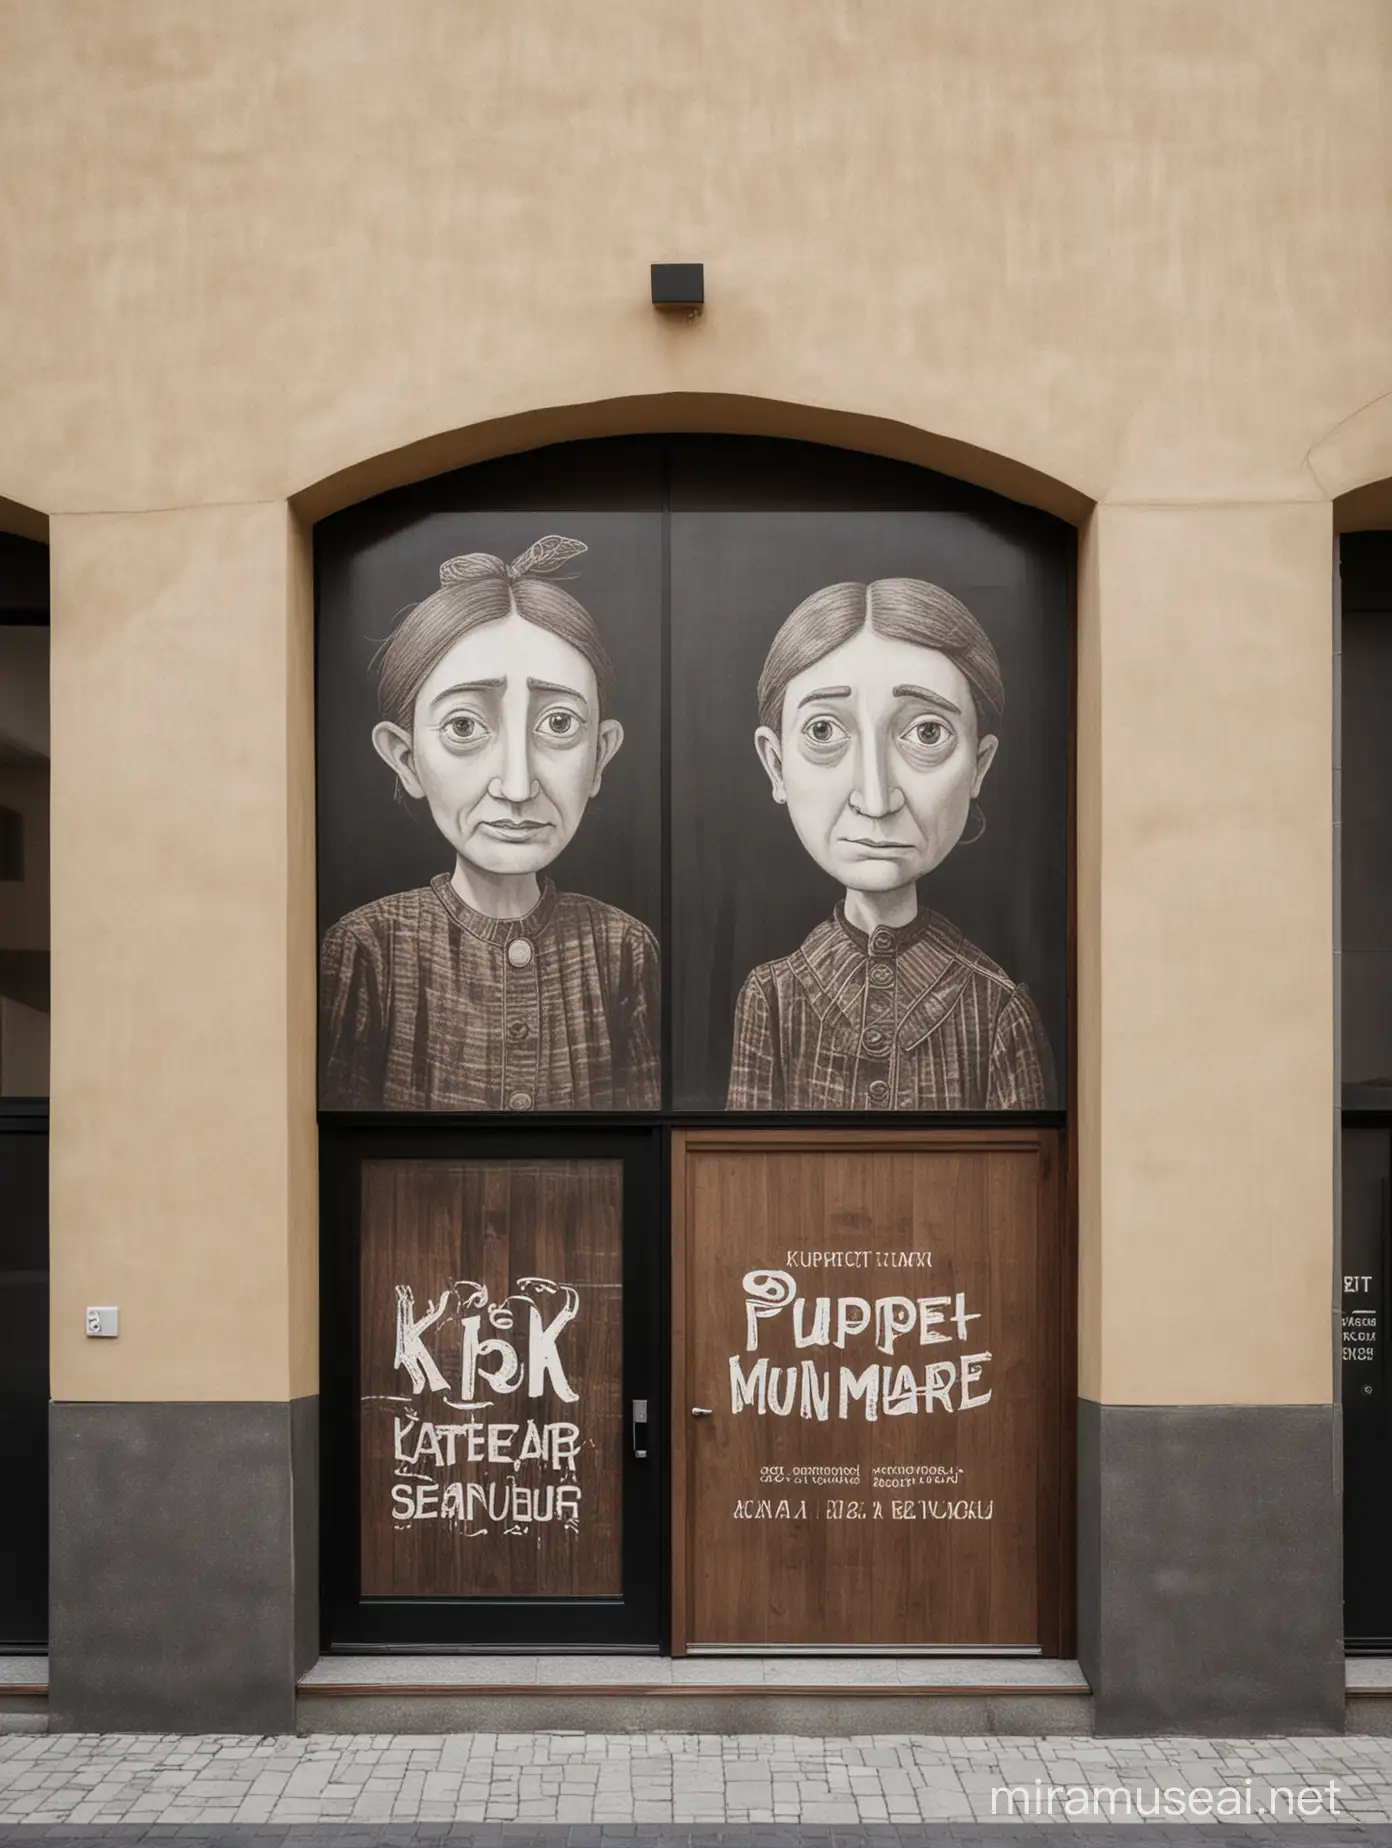 Visual communication inside the new building of the Puppet and Actor Theater "Kubuś" in Kielce, Poland.